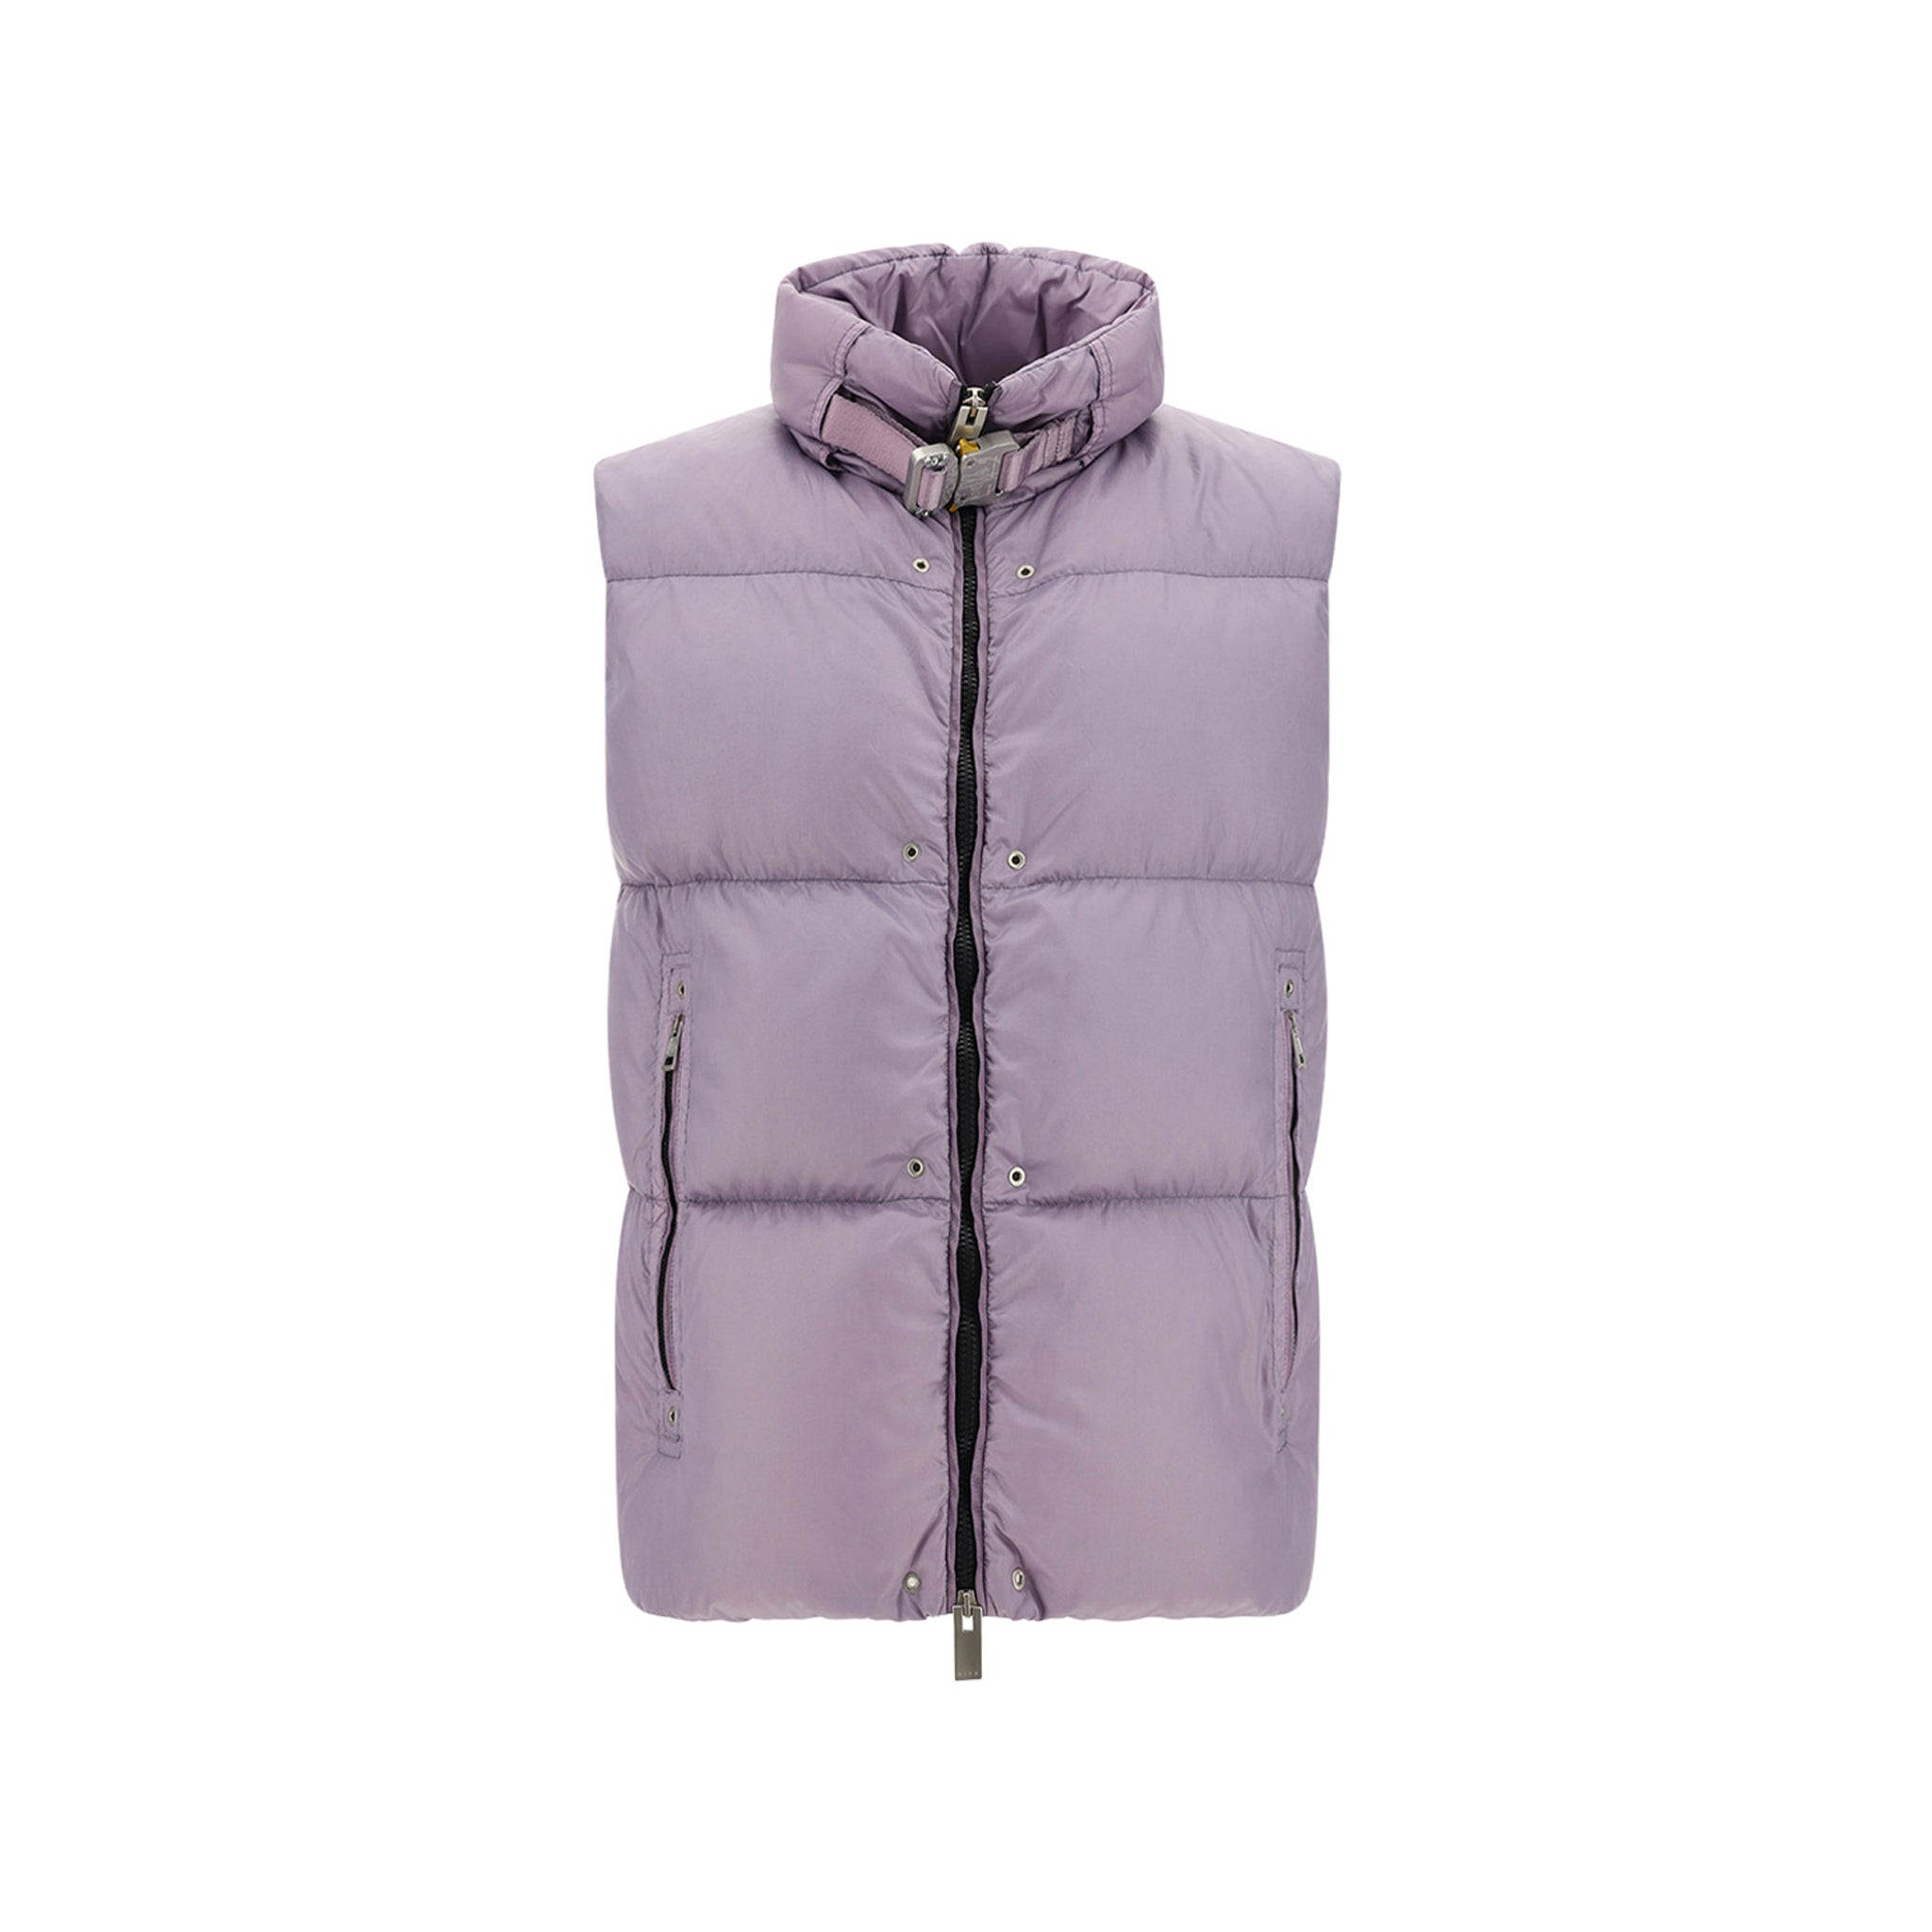 MONCLER-OUTLET-SALE-Moncler-Islote-Padded-Gilet-Unterwasche-LILAC-1-ARCHIVE-COLLECTION.jpg